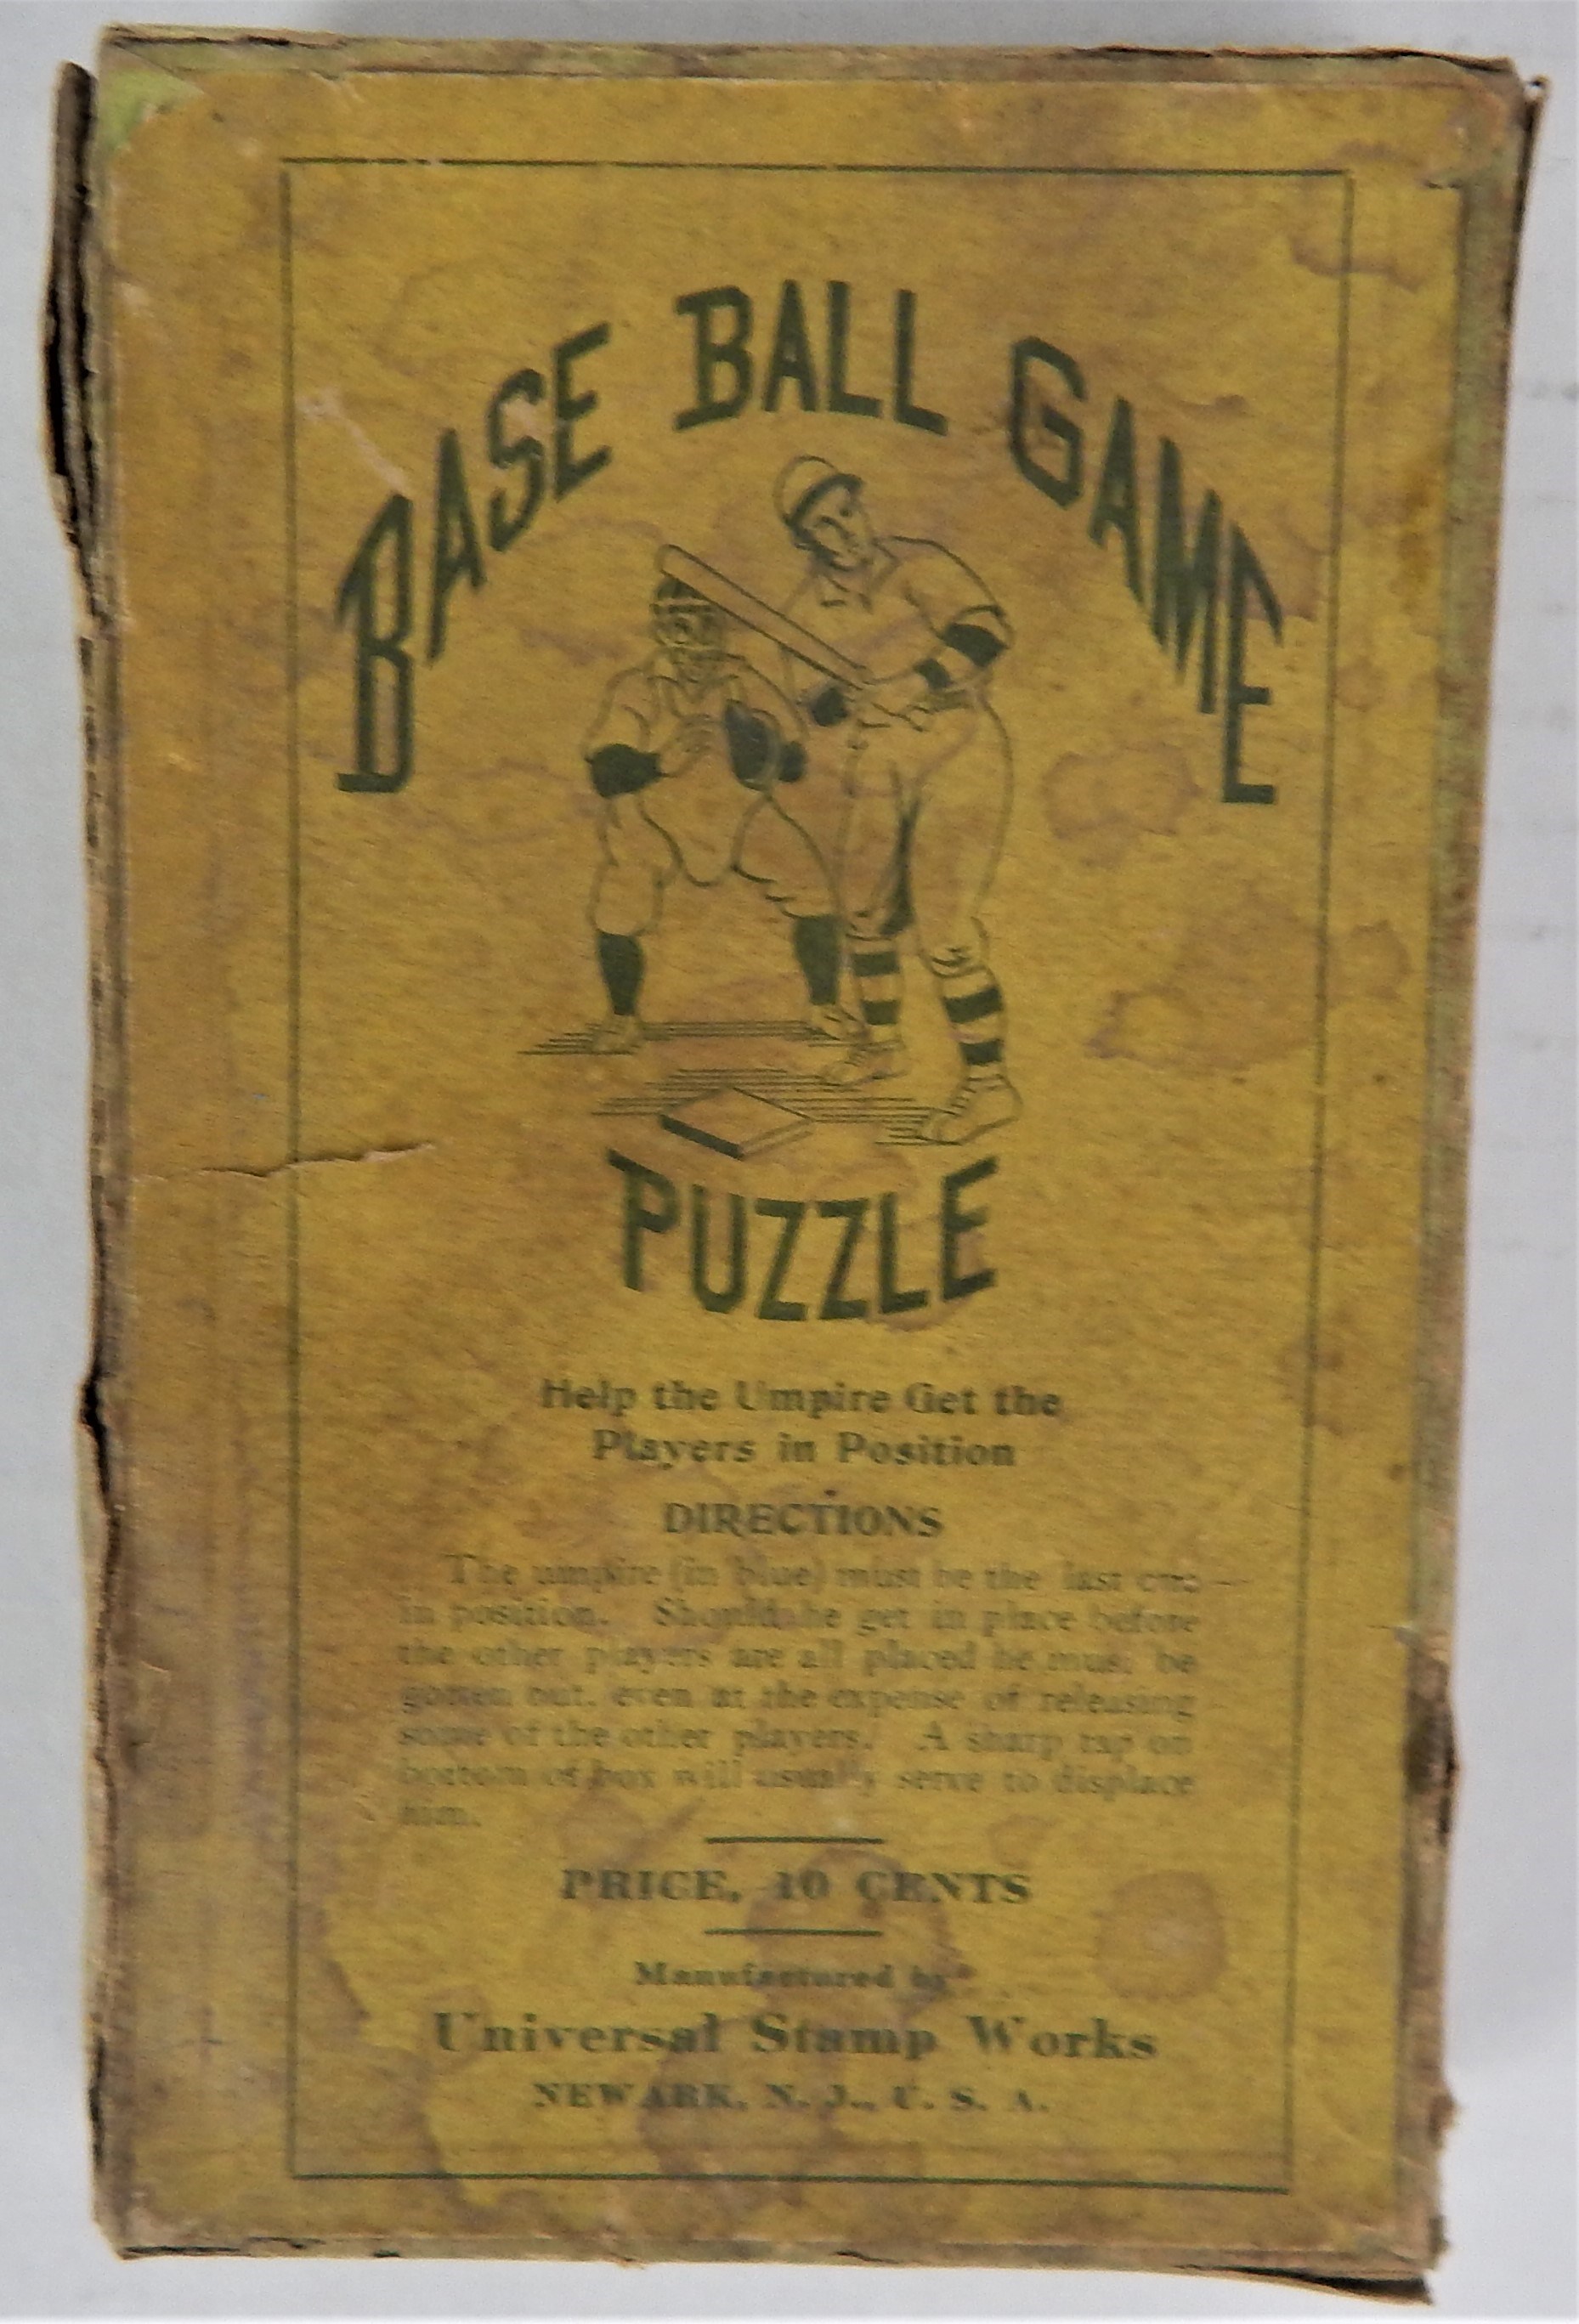 Early Baseball - Turn of the Century Base Ball "Dexterity" Puzzle